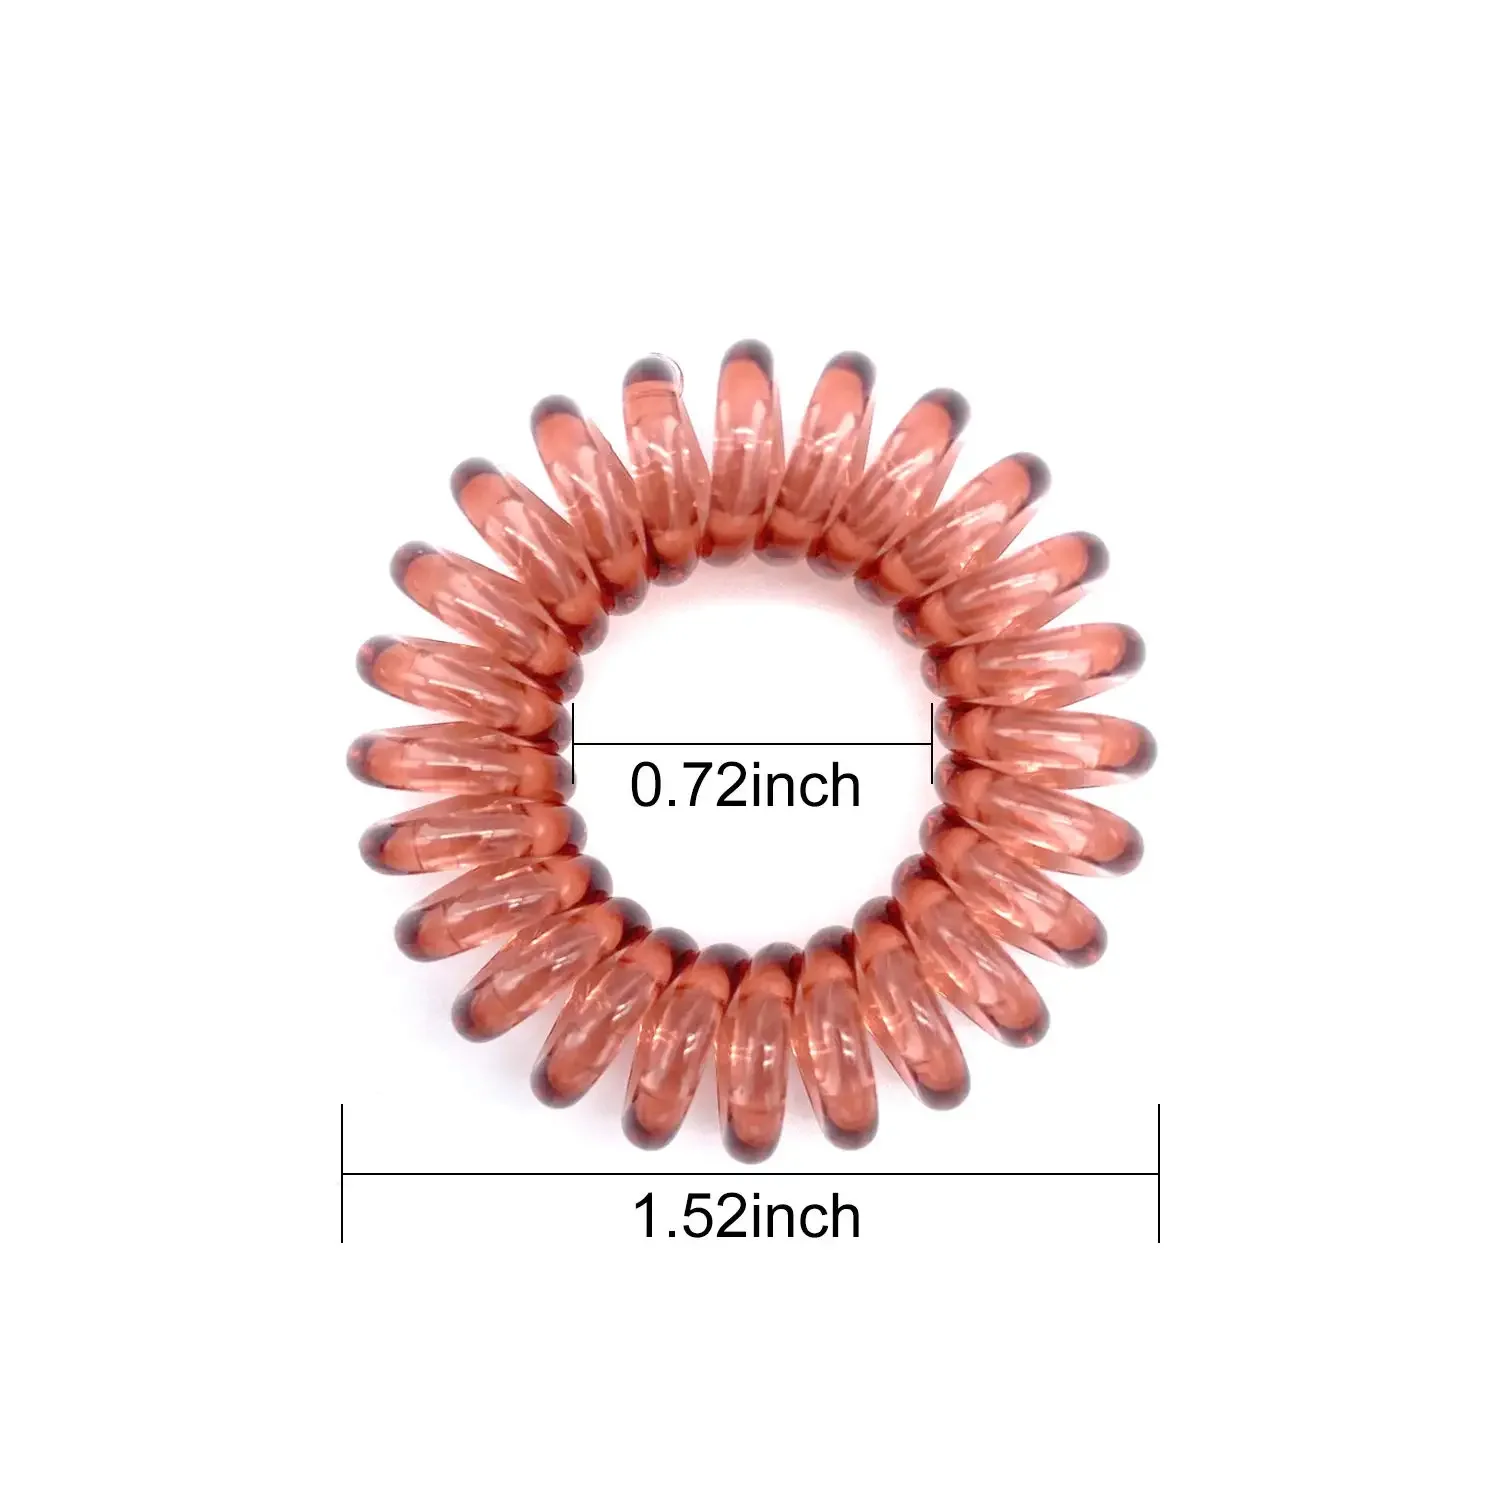 4 Pcs/Box Telephone Wire Elastic Hair Rubber Bands Transparent Spiral Hair Ties Rings Gum for Women Girls Hair Accessories